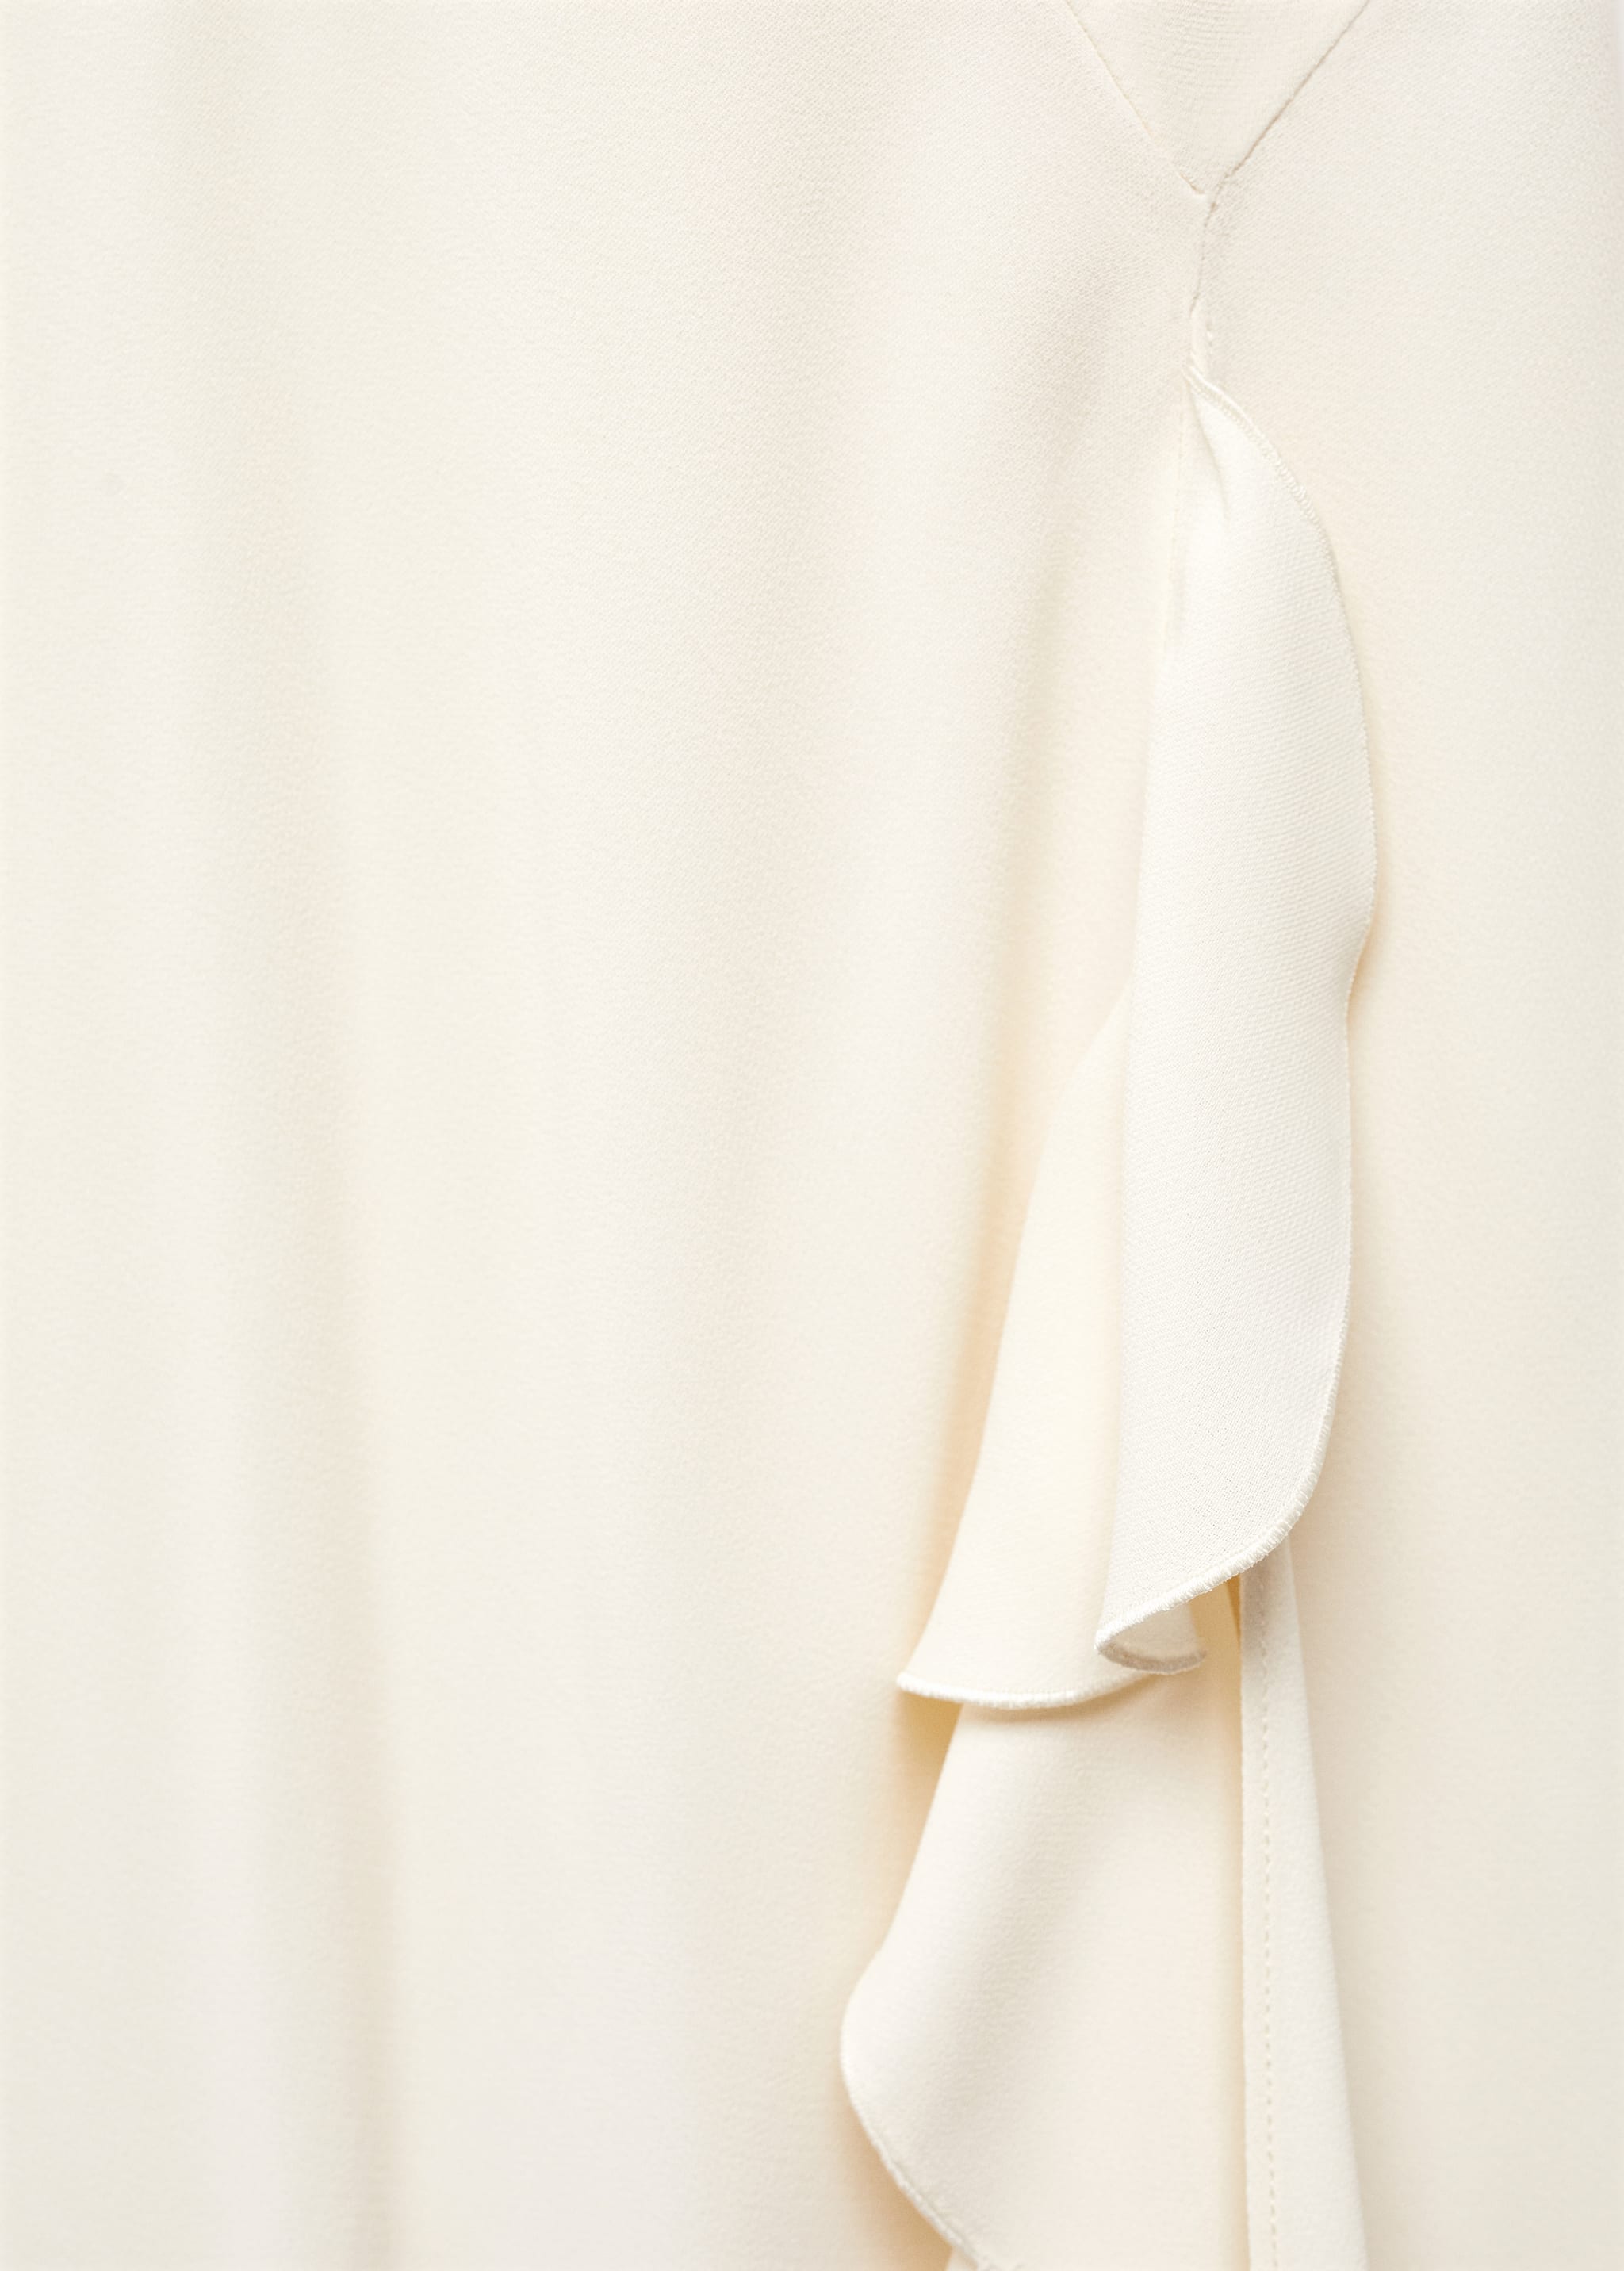 Asymmetric ruffled dress - Details of the article 8